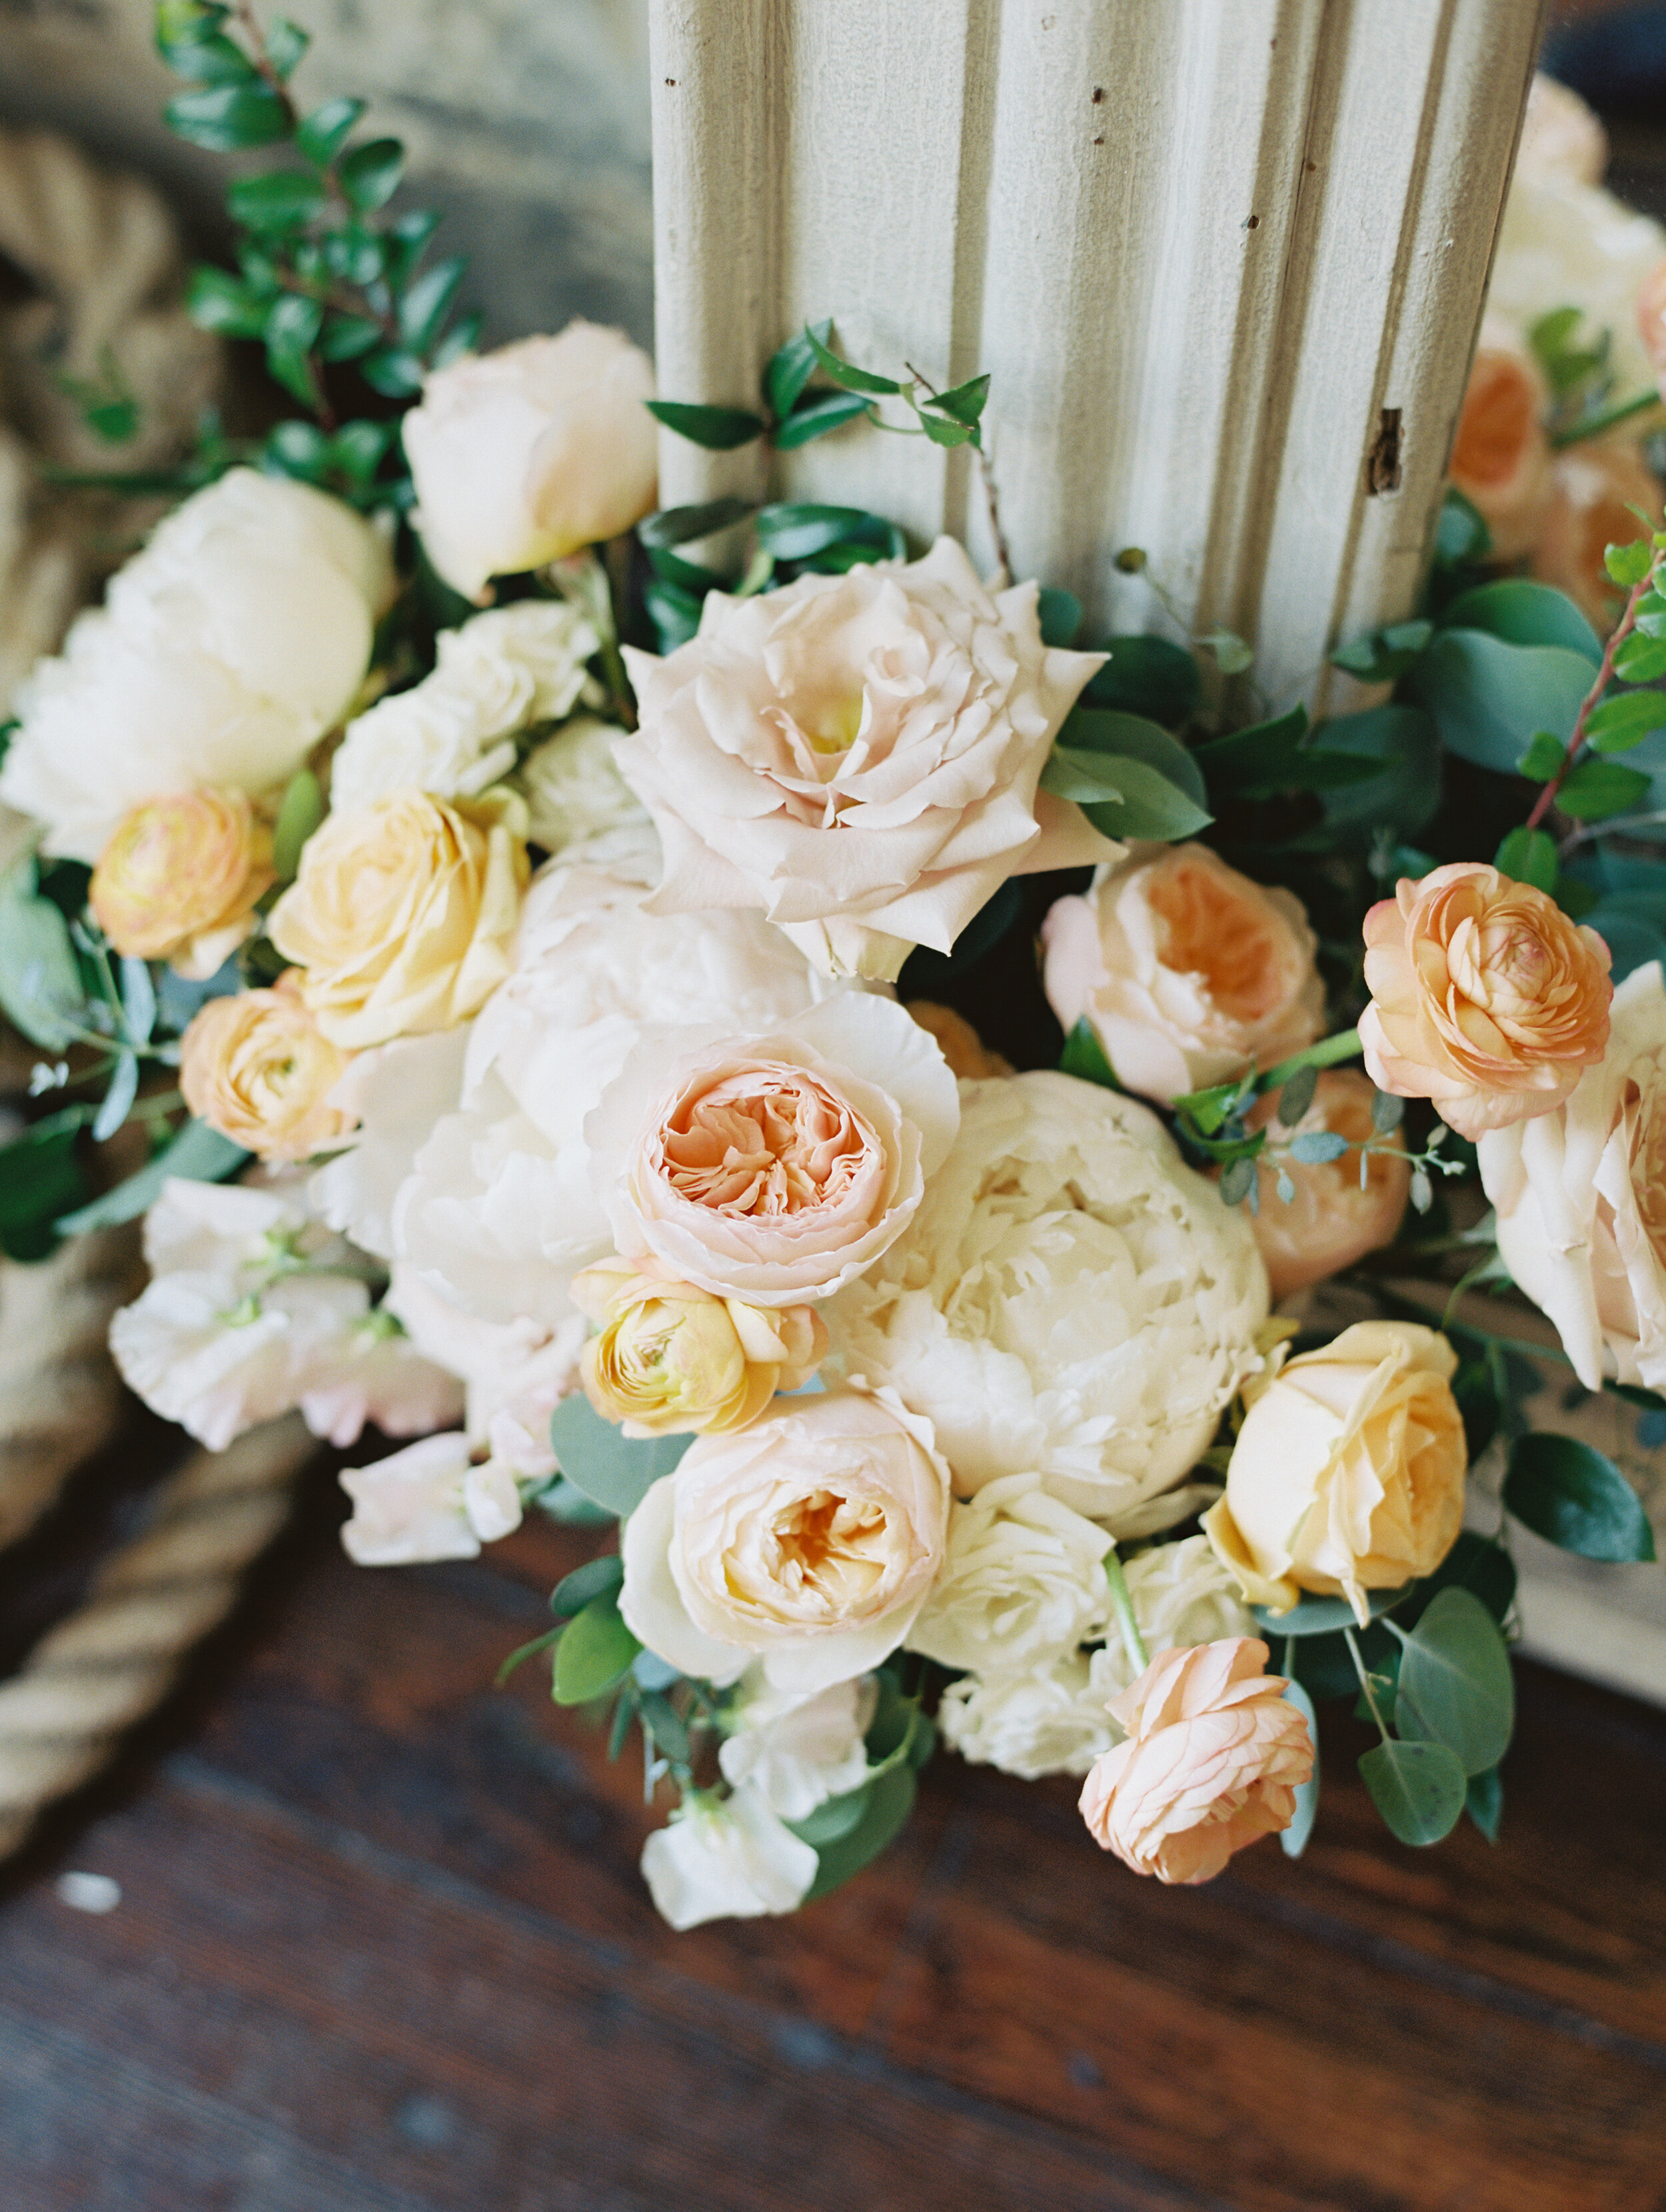 Bridal bouquet with peach ranunculus, cream peonies, blush and golden yellow garden roses, and natural, untamed greenery. June wedding at the Cordelle. Nashville Wedding Florist.